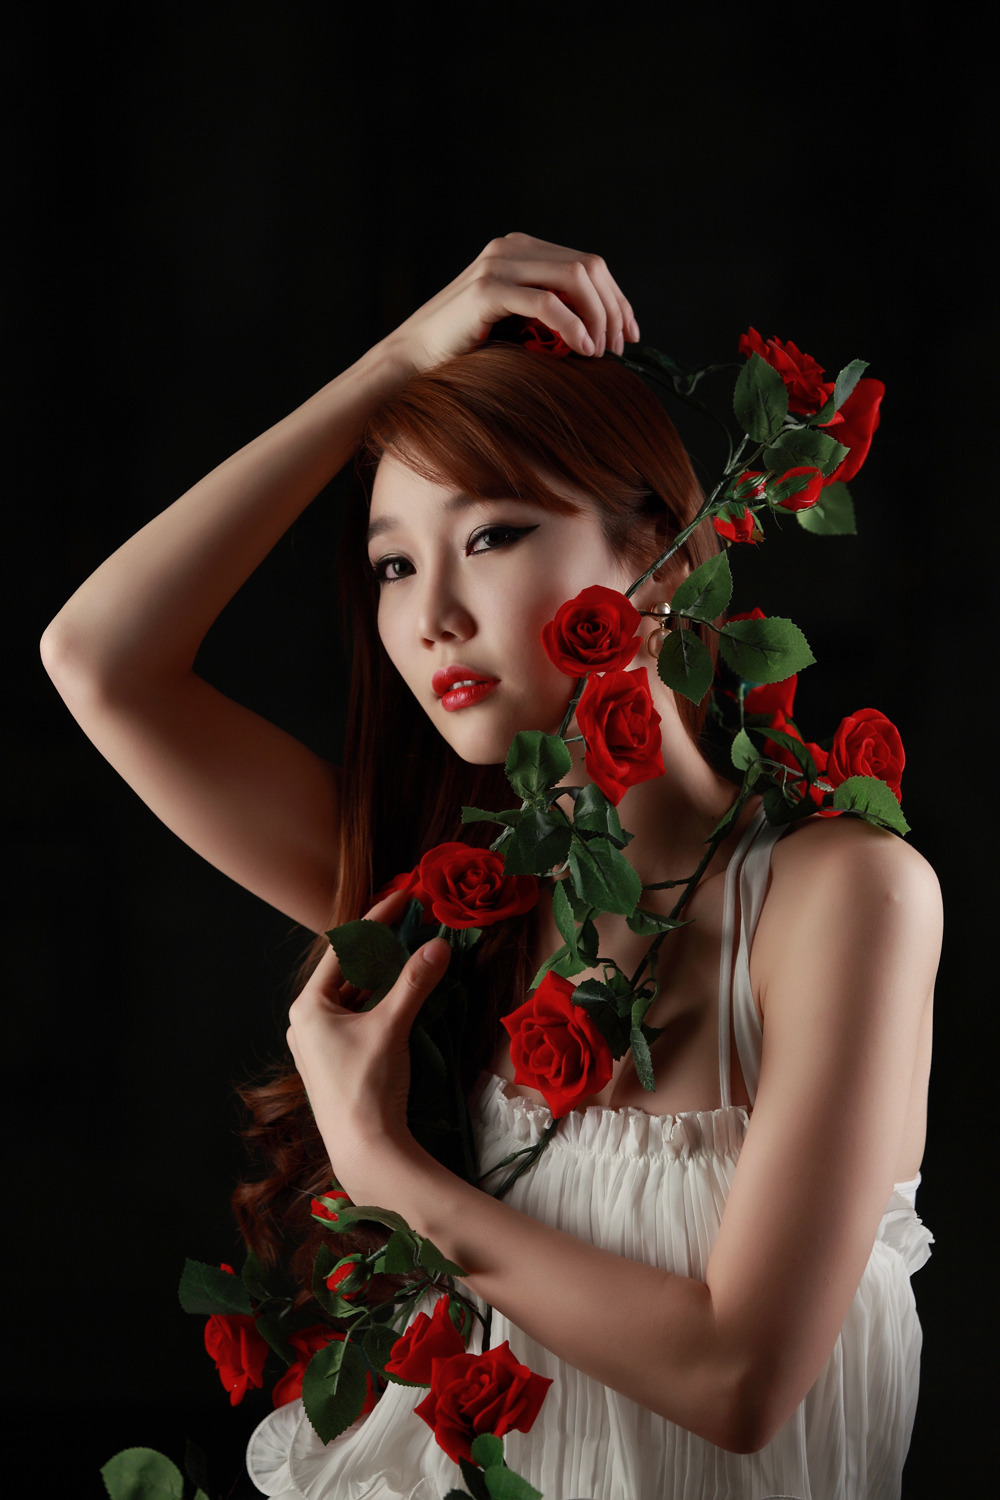 Go Jung Ah Korean lady in white maxi and red roses.